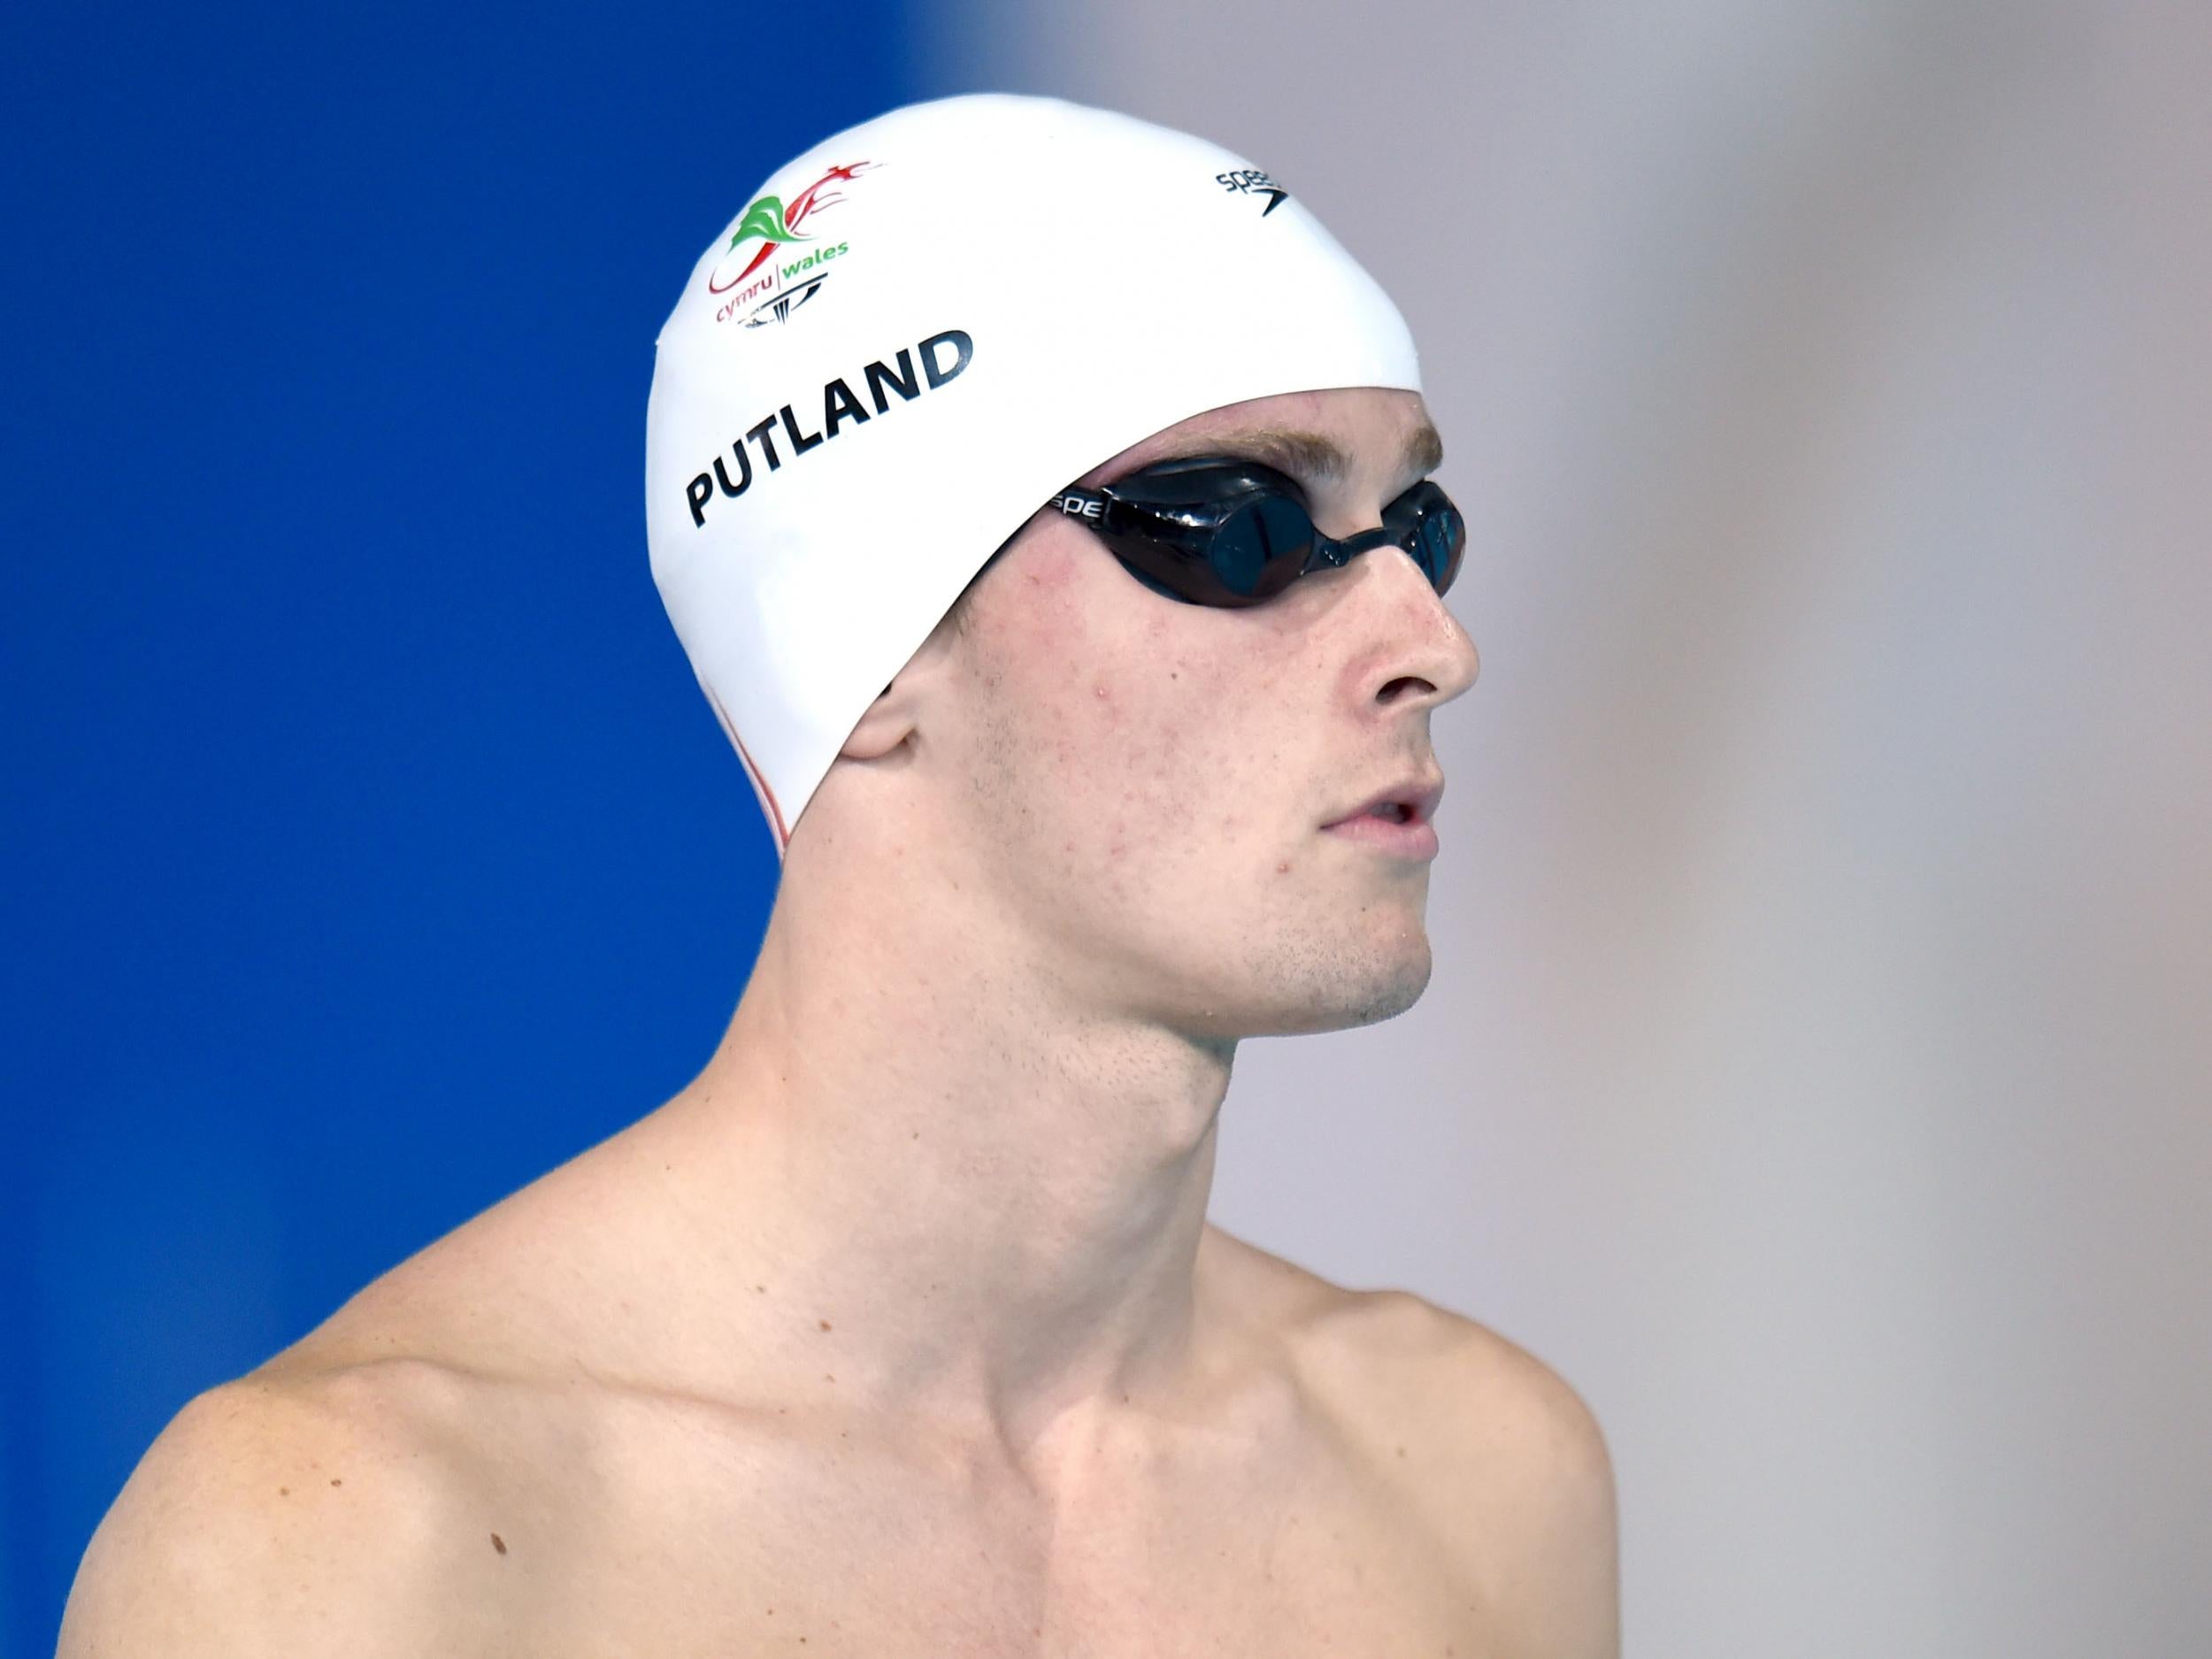 Otto Putland, at the Men's 100m Backstroke during the 2014 Commonwealth Games in Glasgow, allegedly had sex with the girl twice